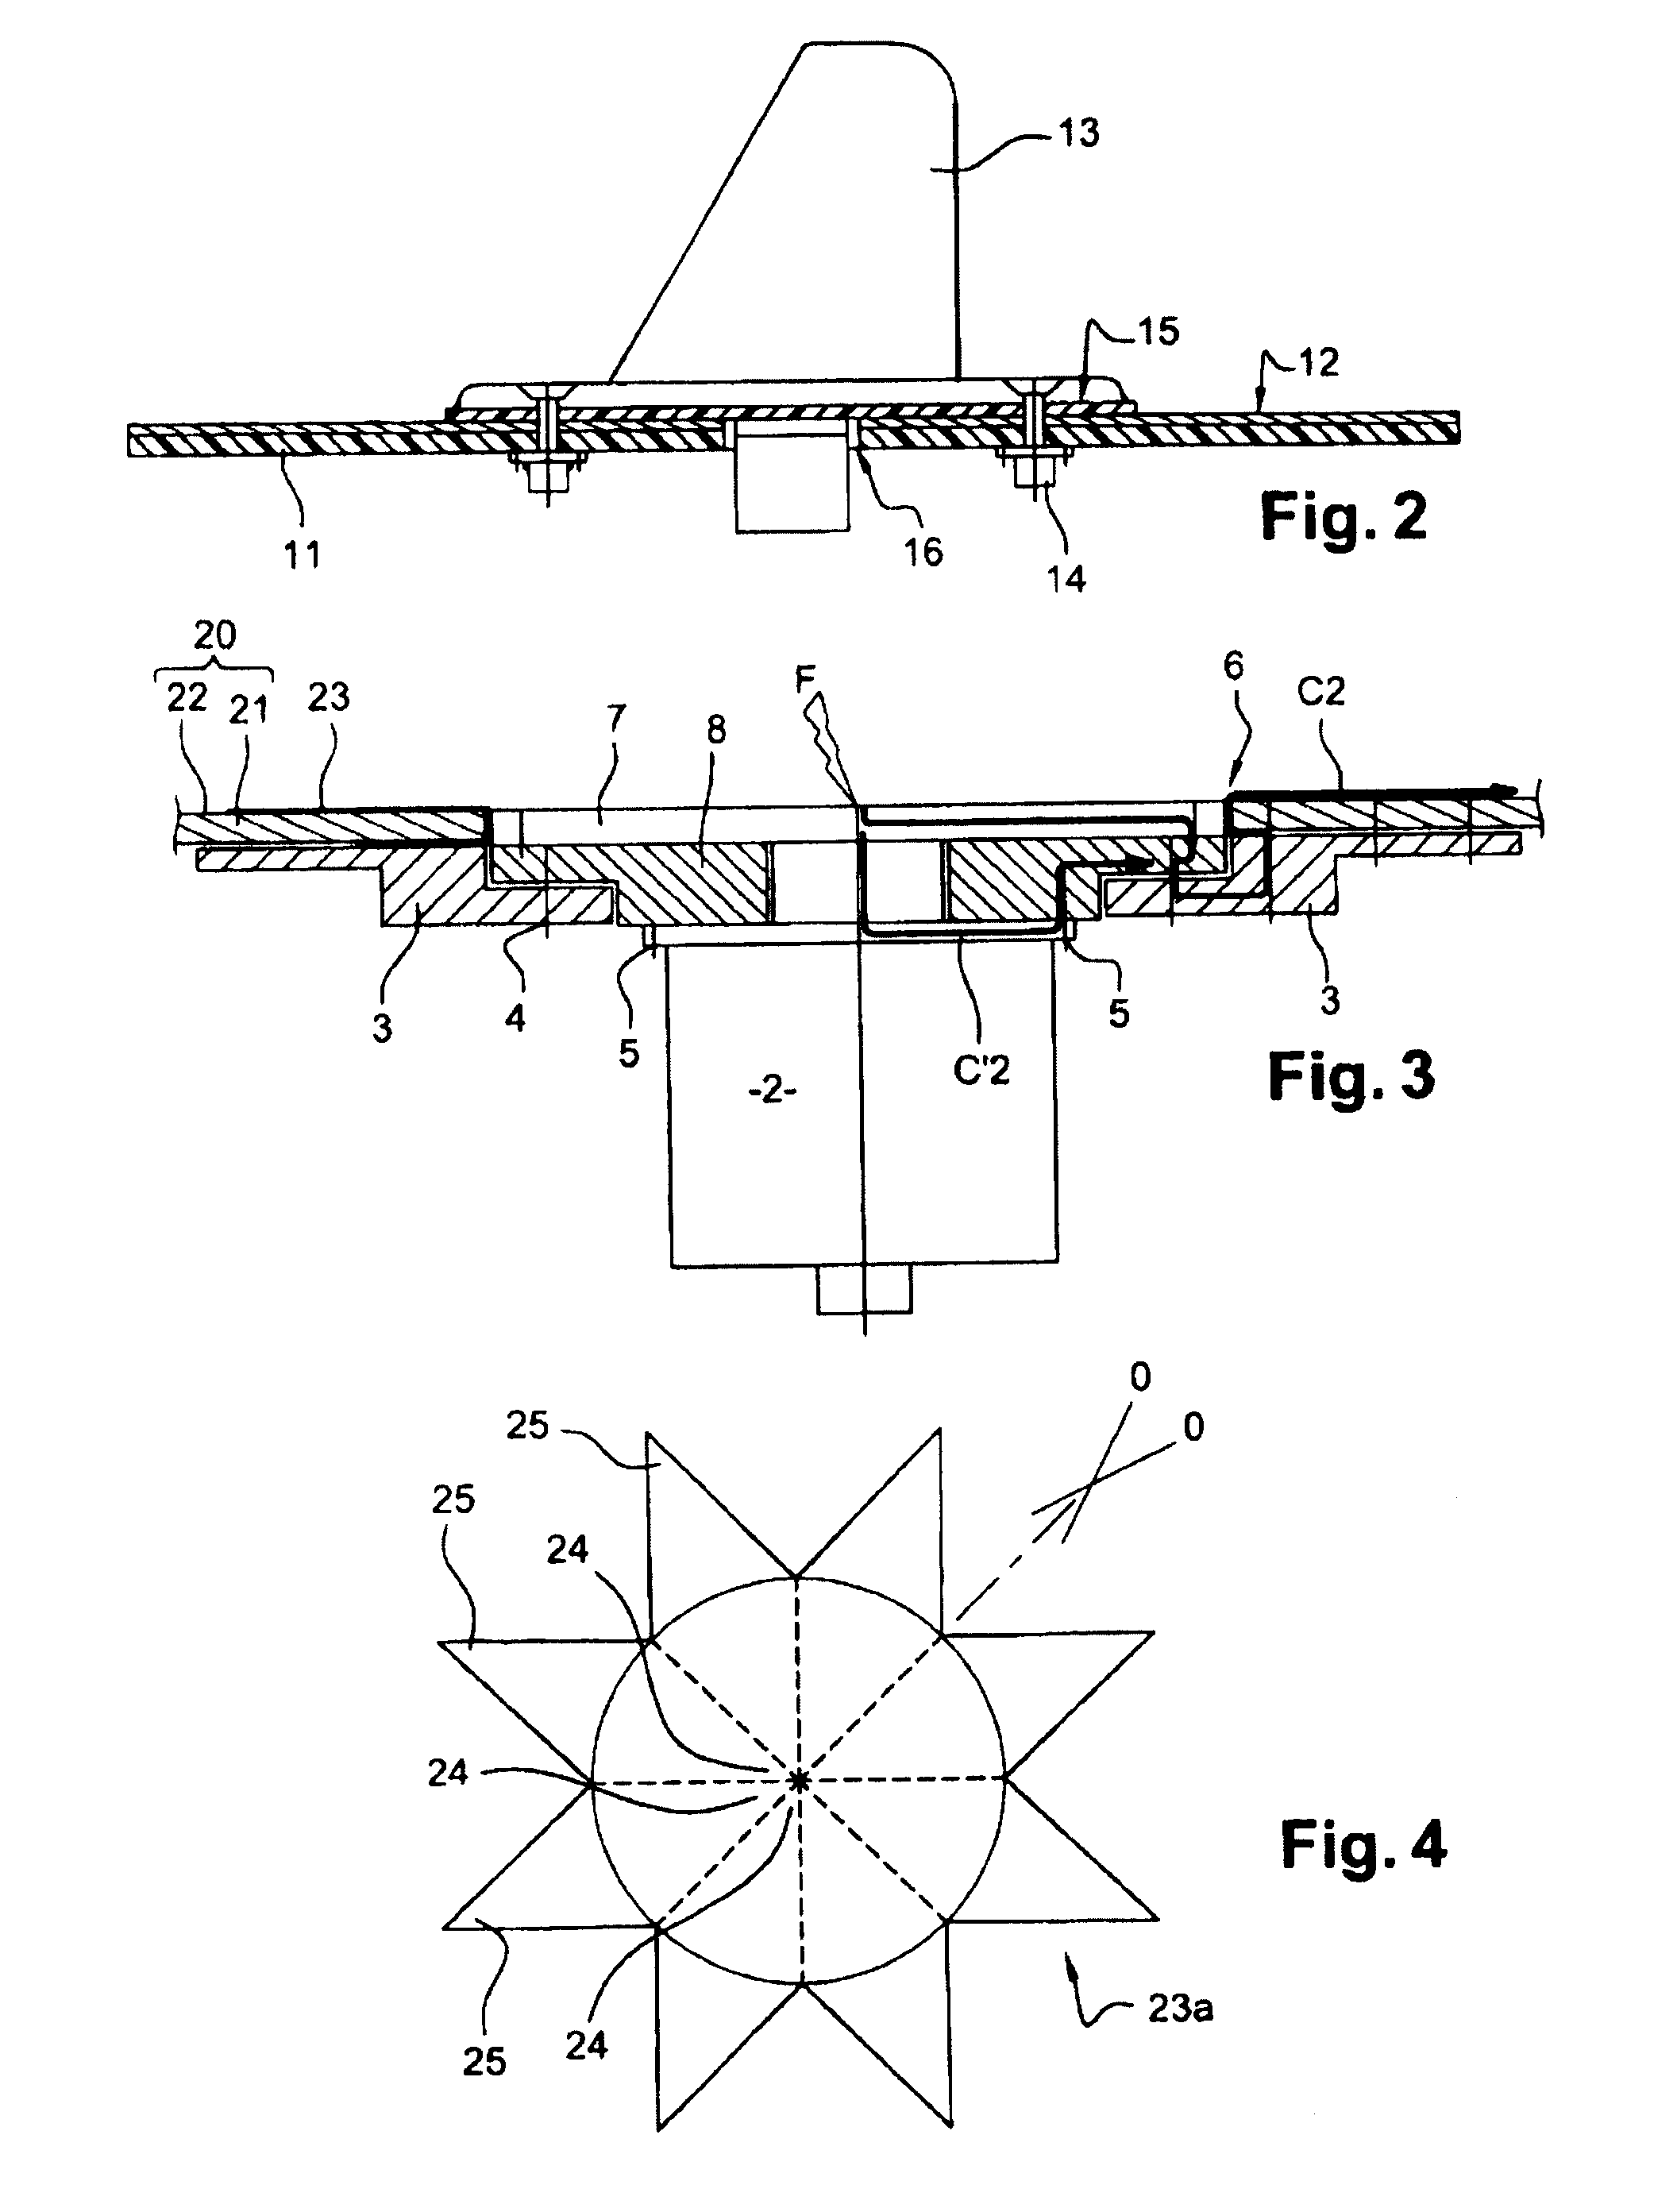 System for dissipating a lightning current generated by a thunderstorm discharge on an aircraft